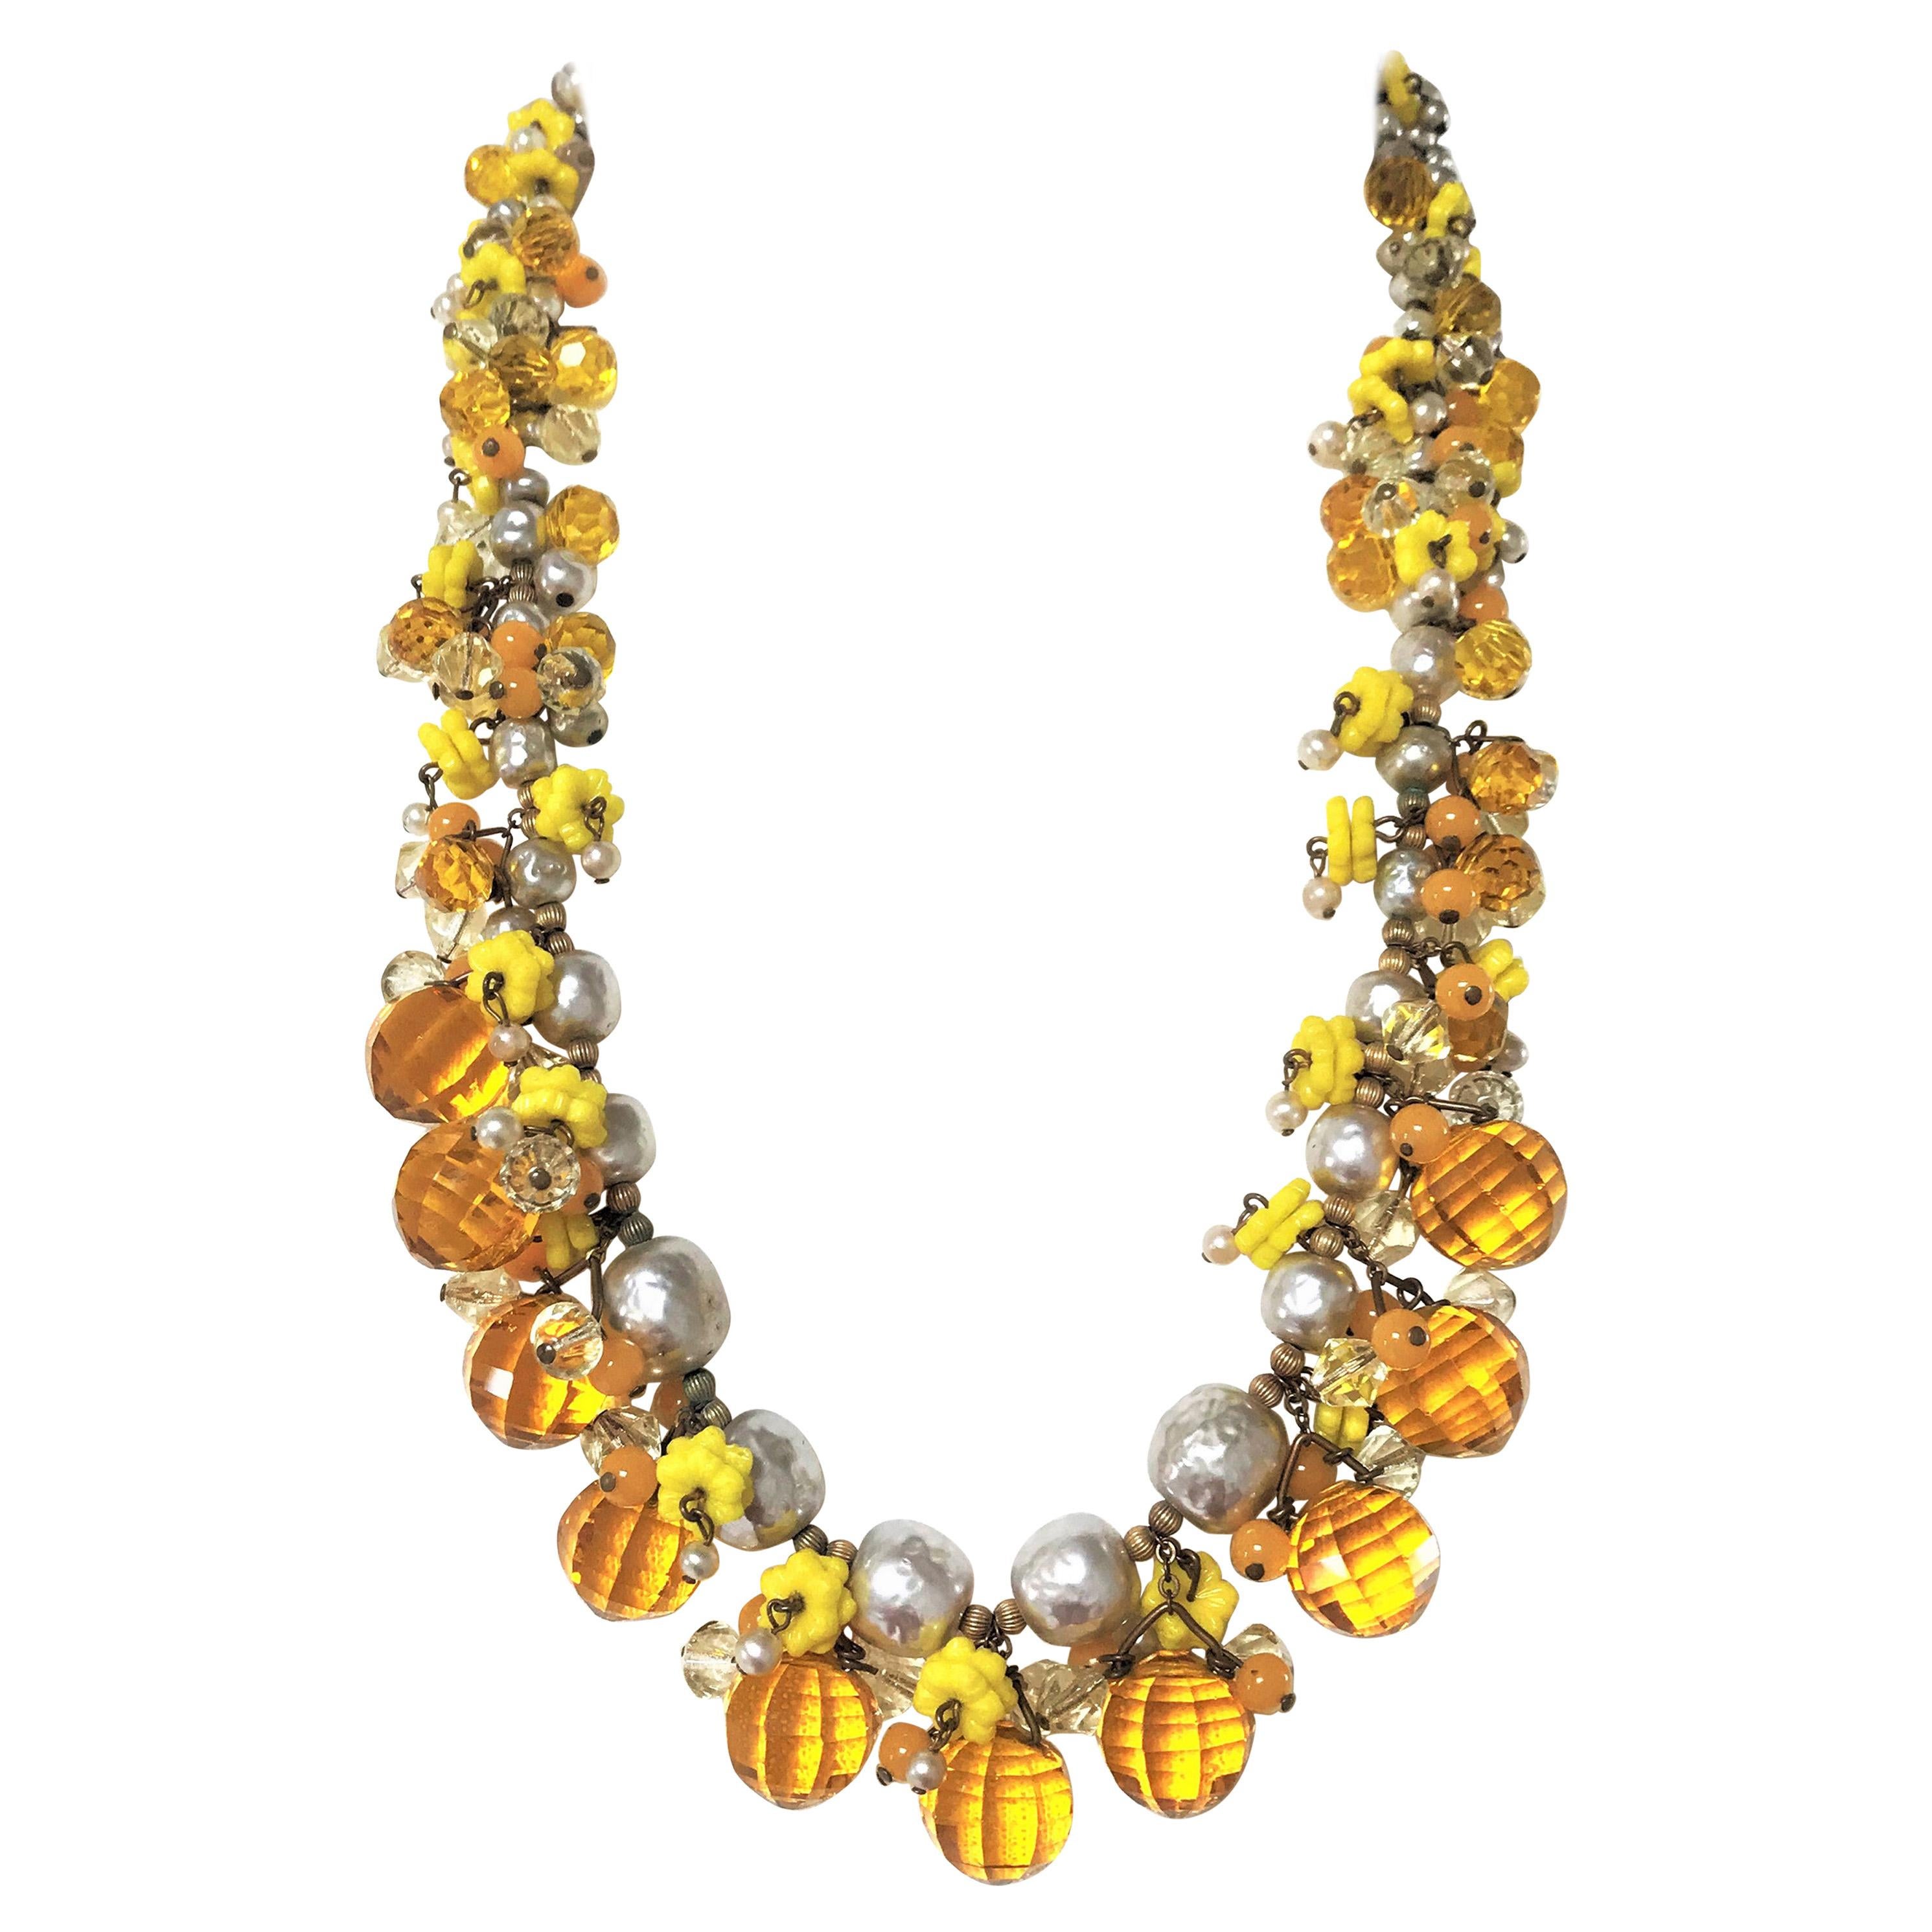 MIRIAM HASKELL necklace book piece 1950s with many cut yellow glass balls For Sale